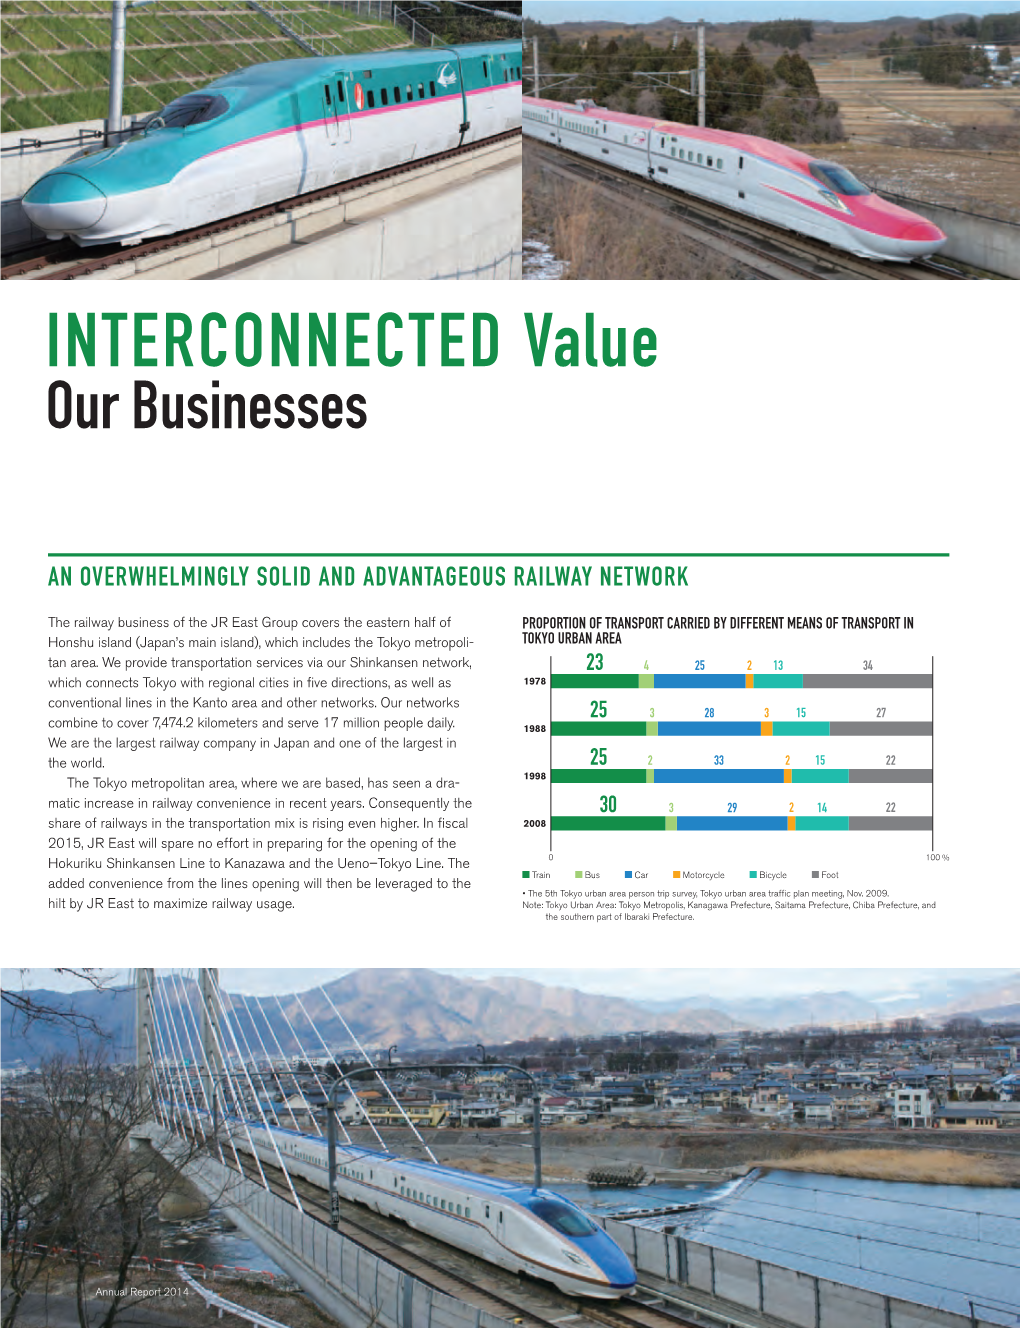 Interconnected Value [PDF/1.44MB]